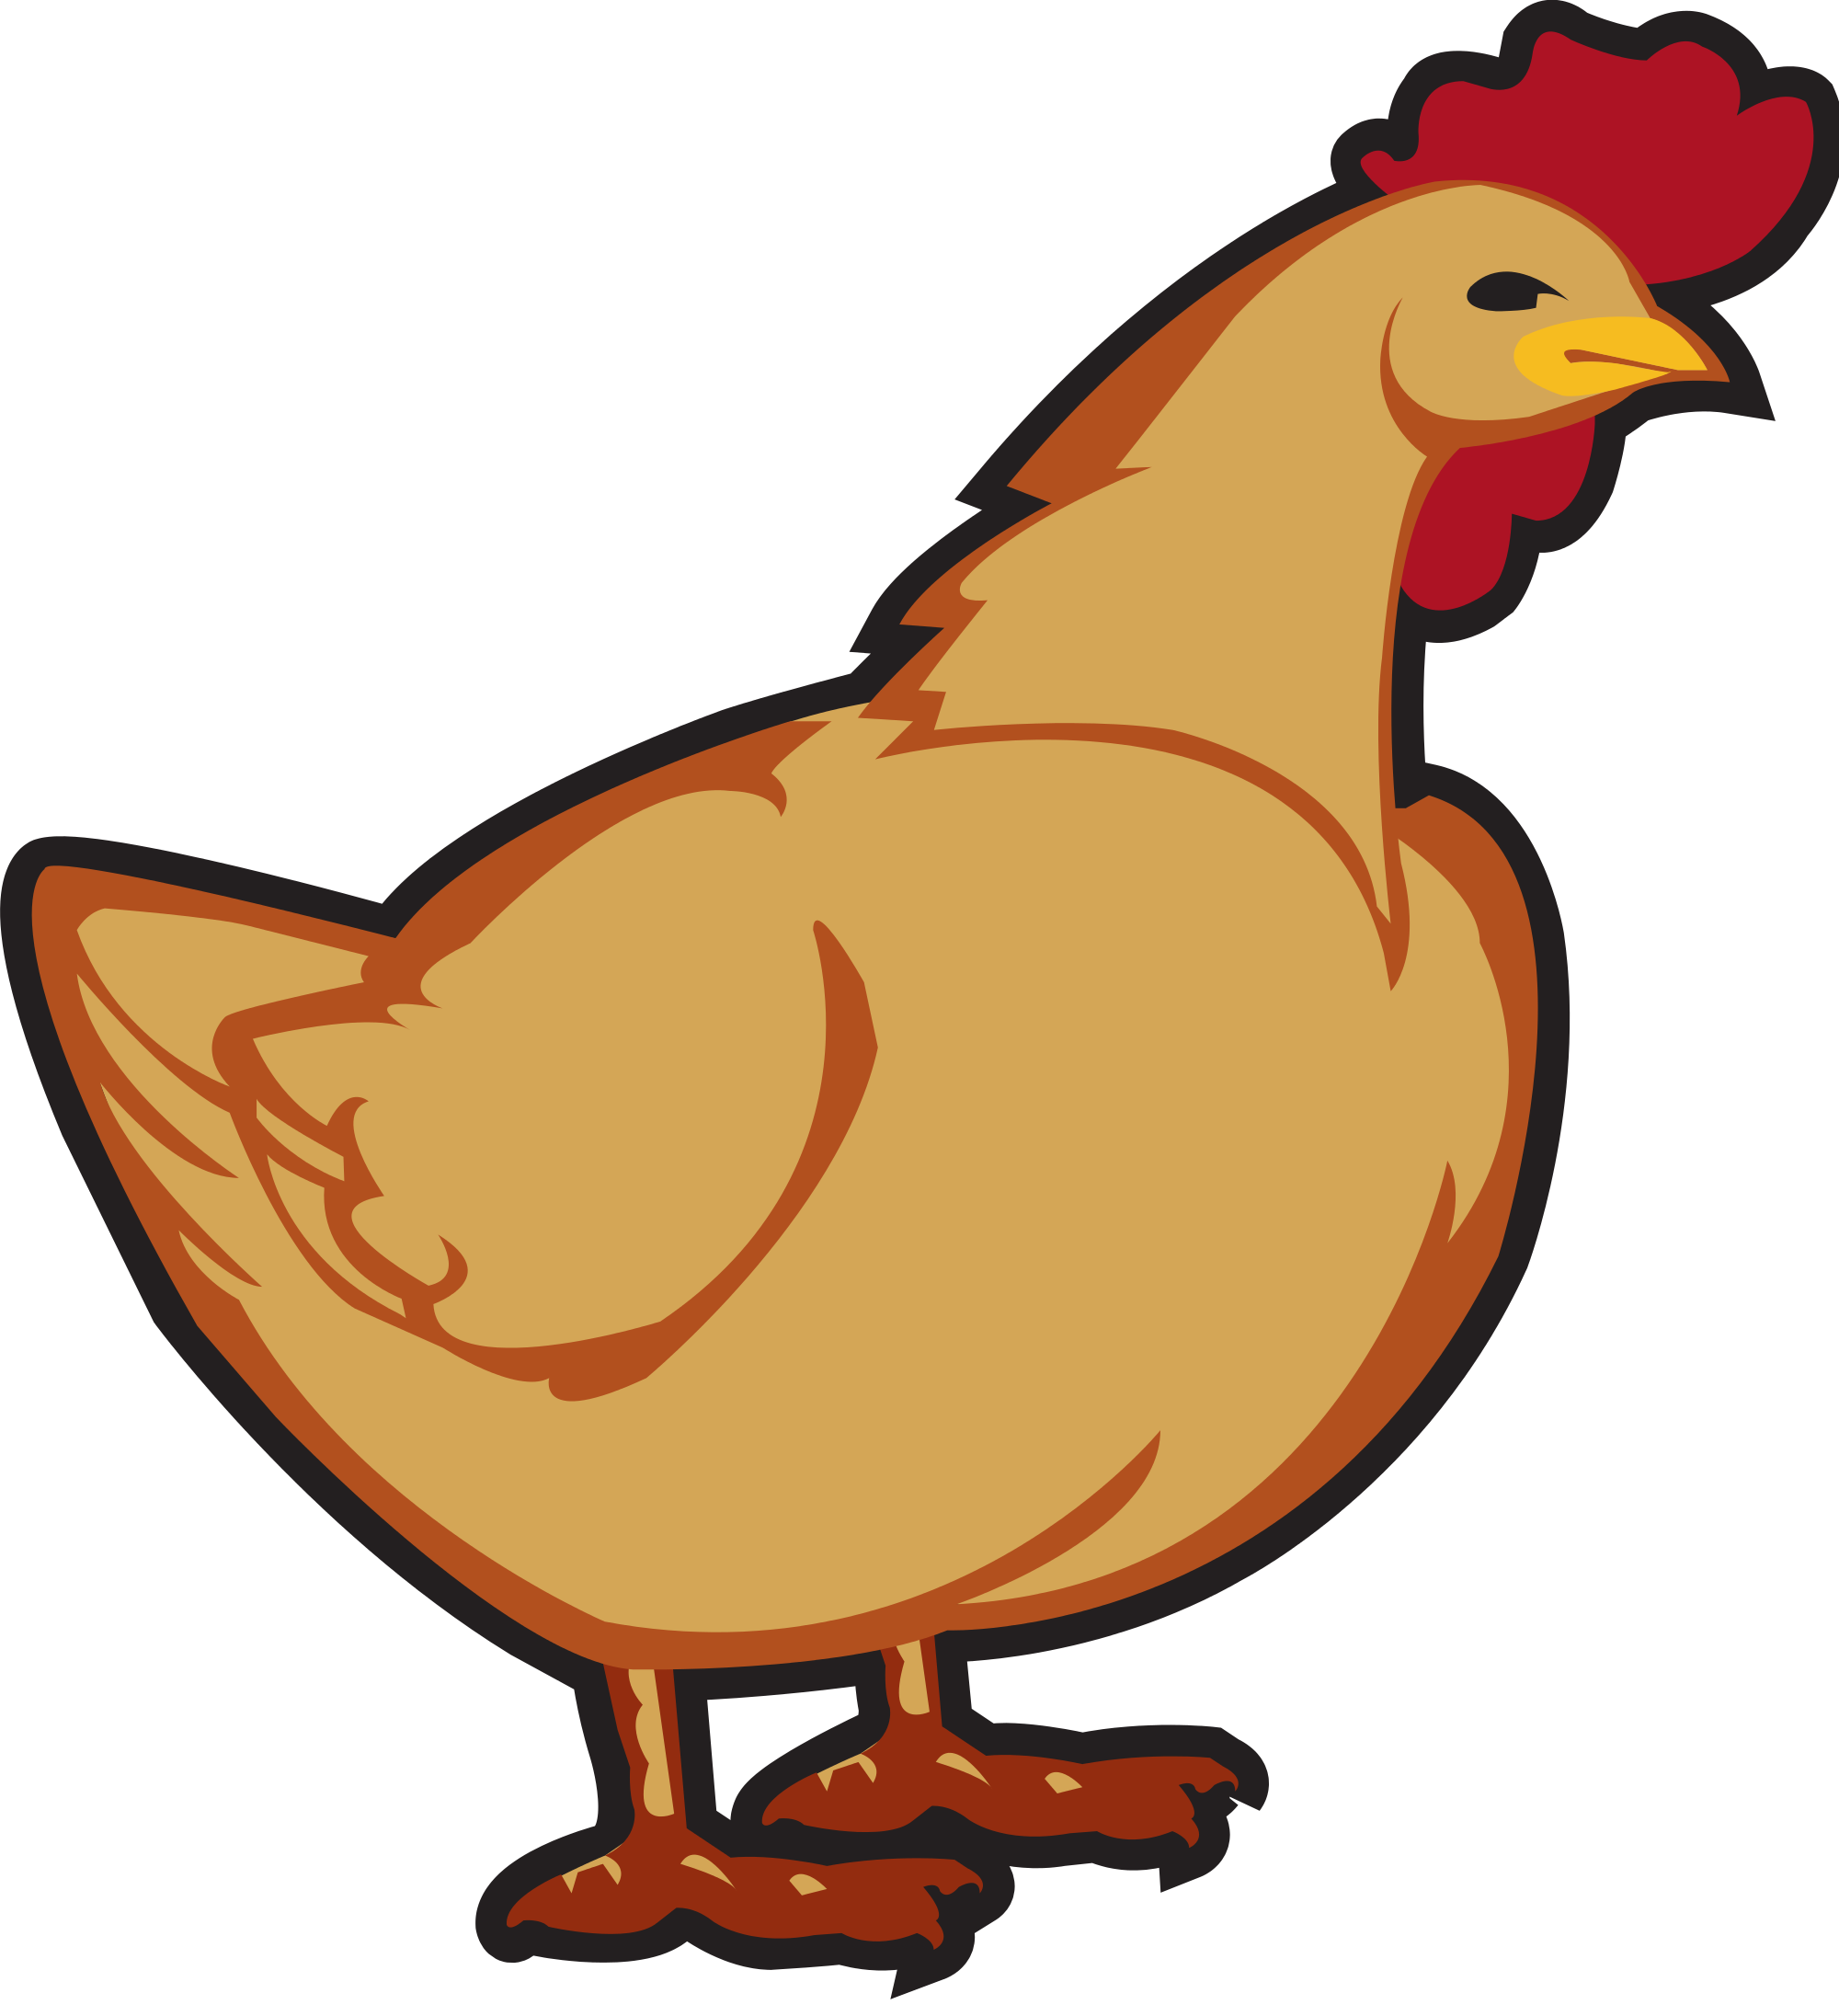 Chickens clipart transparent.